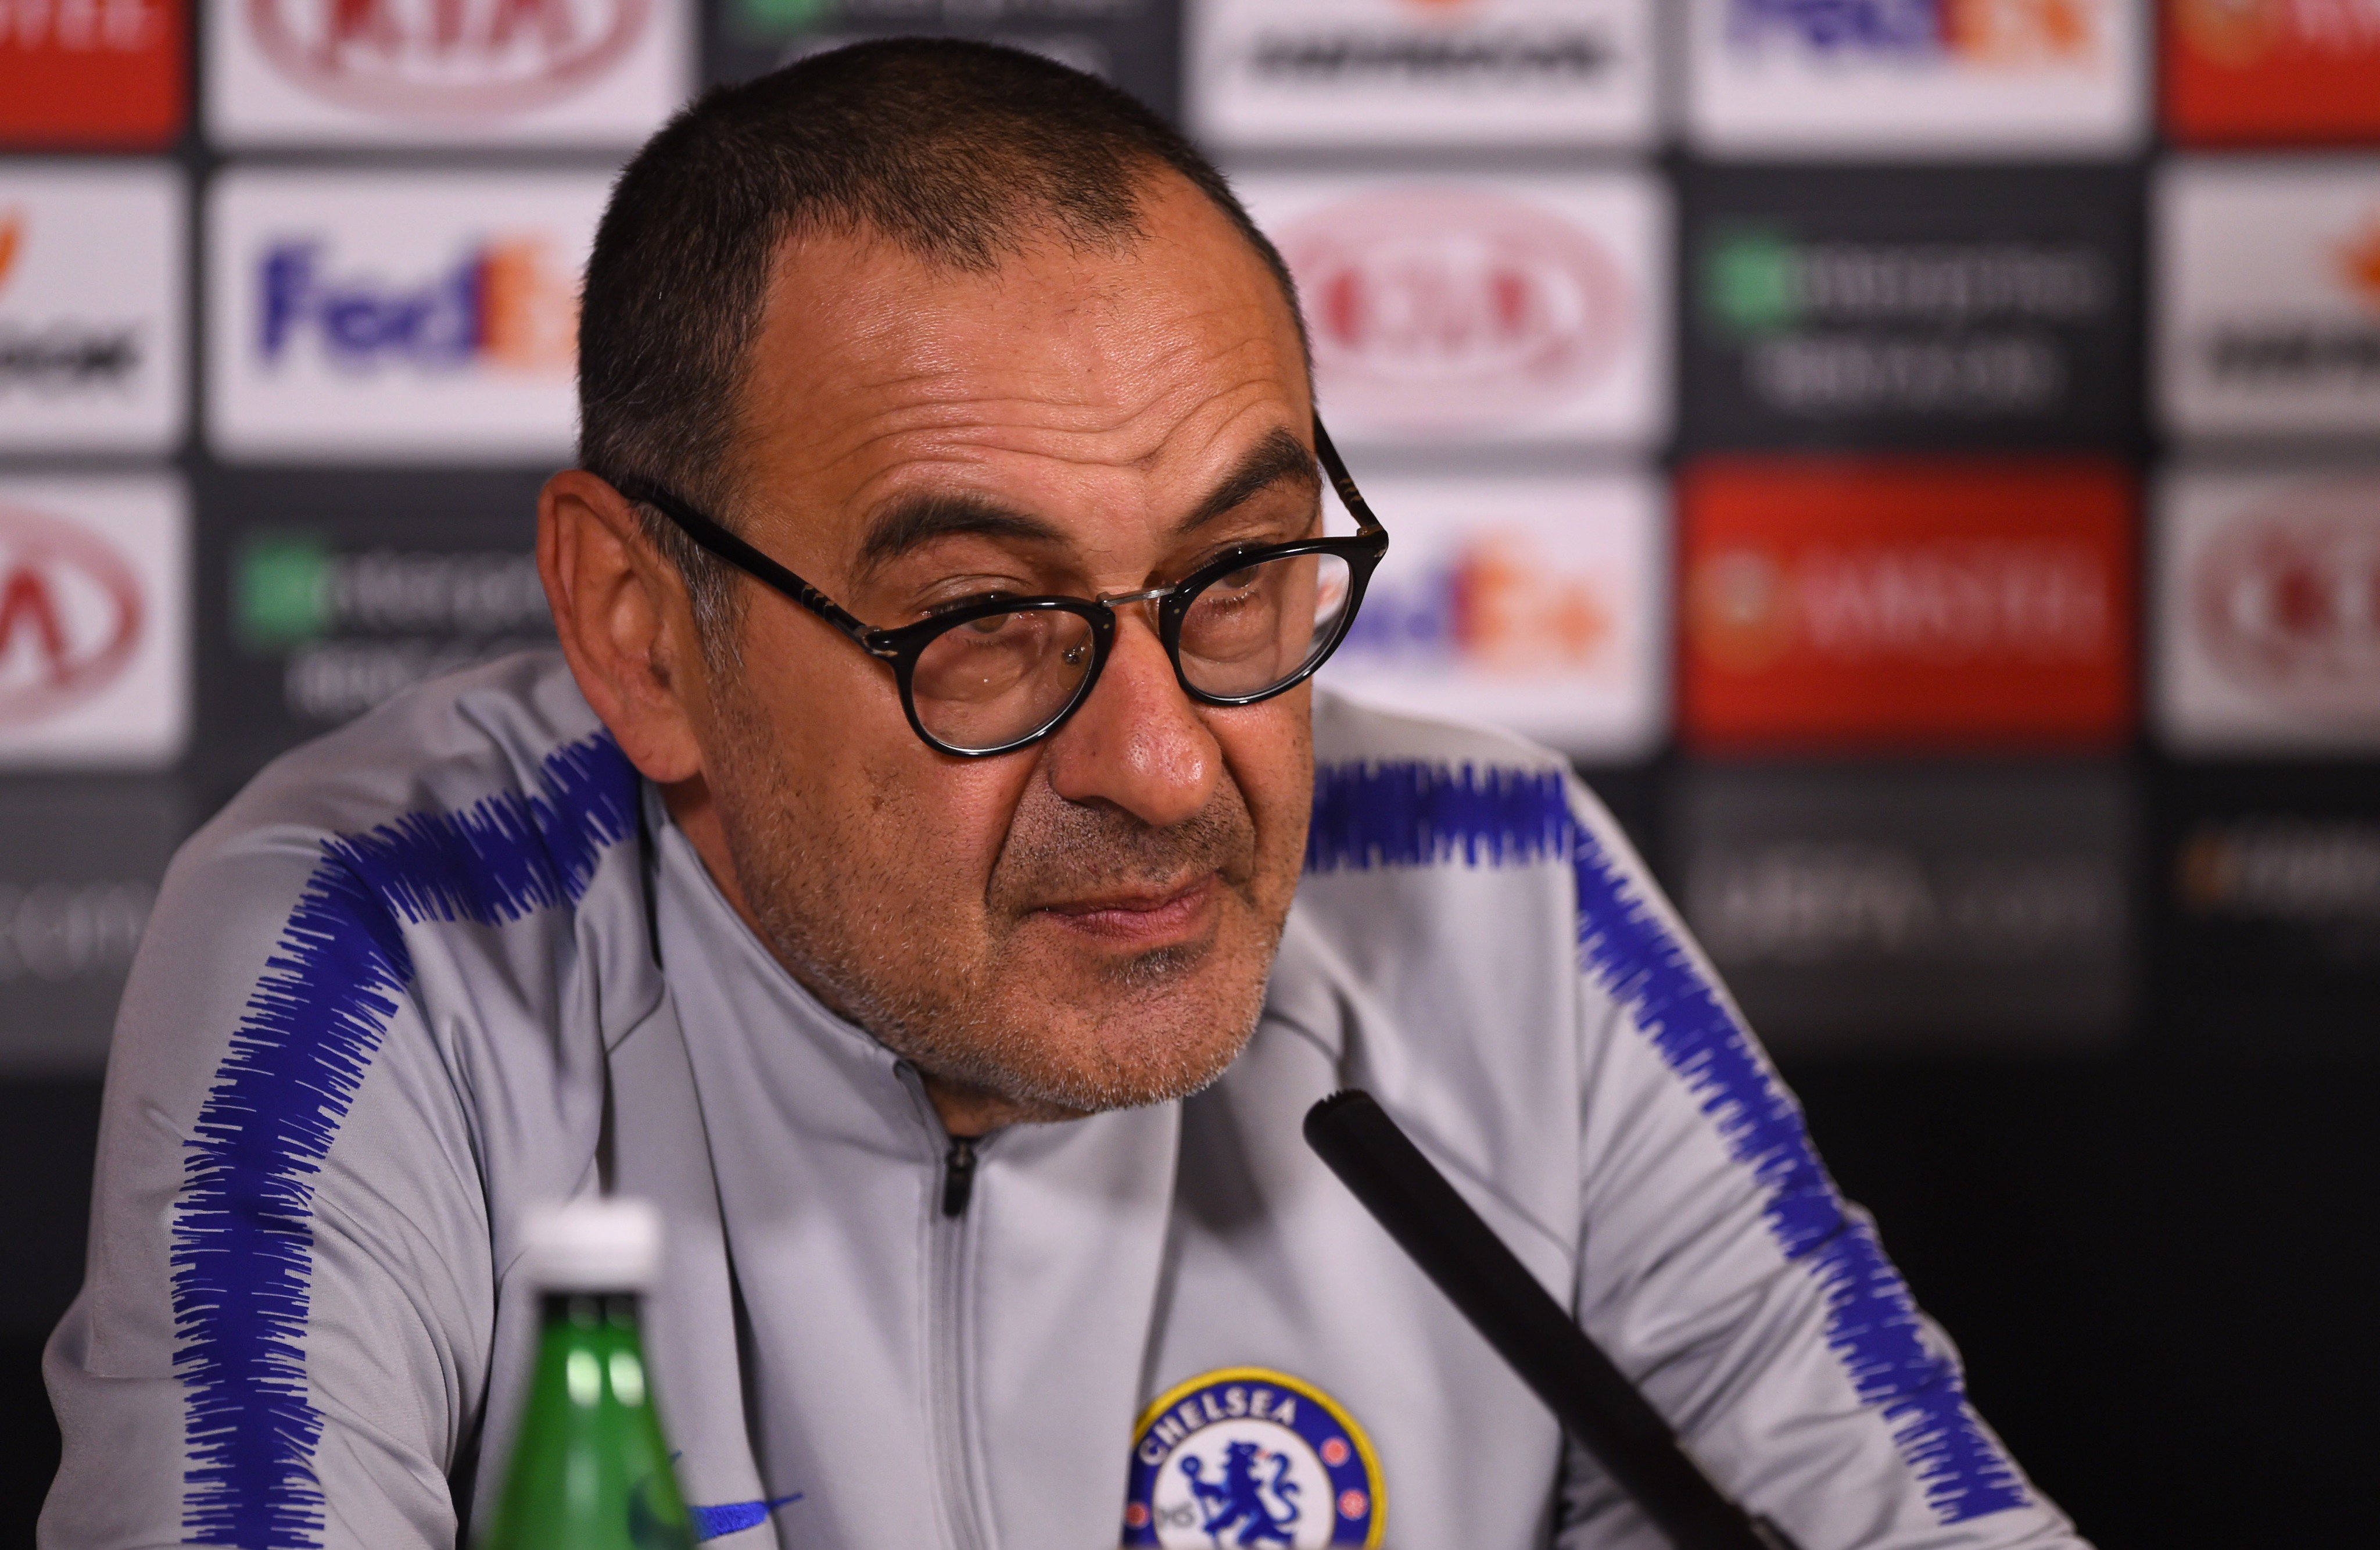 Sarri threatens to leave Chelsea in shocking press conference claim